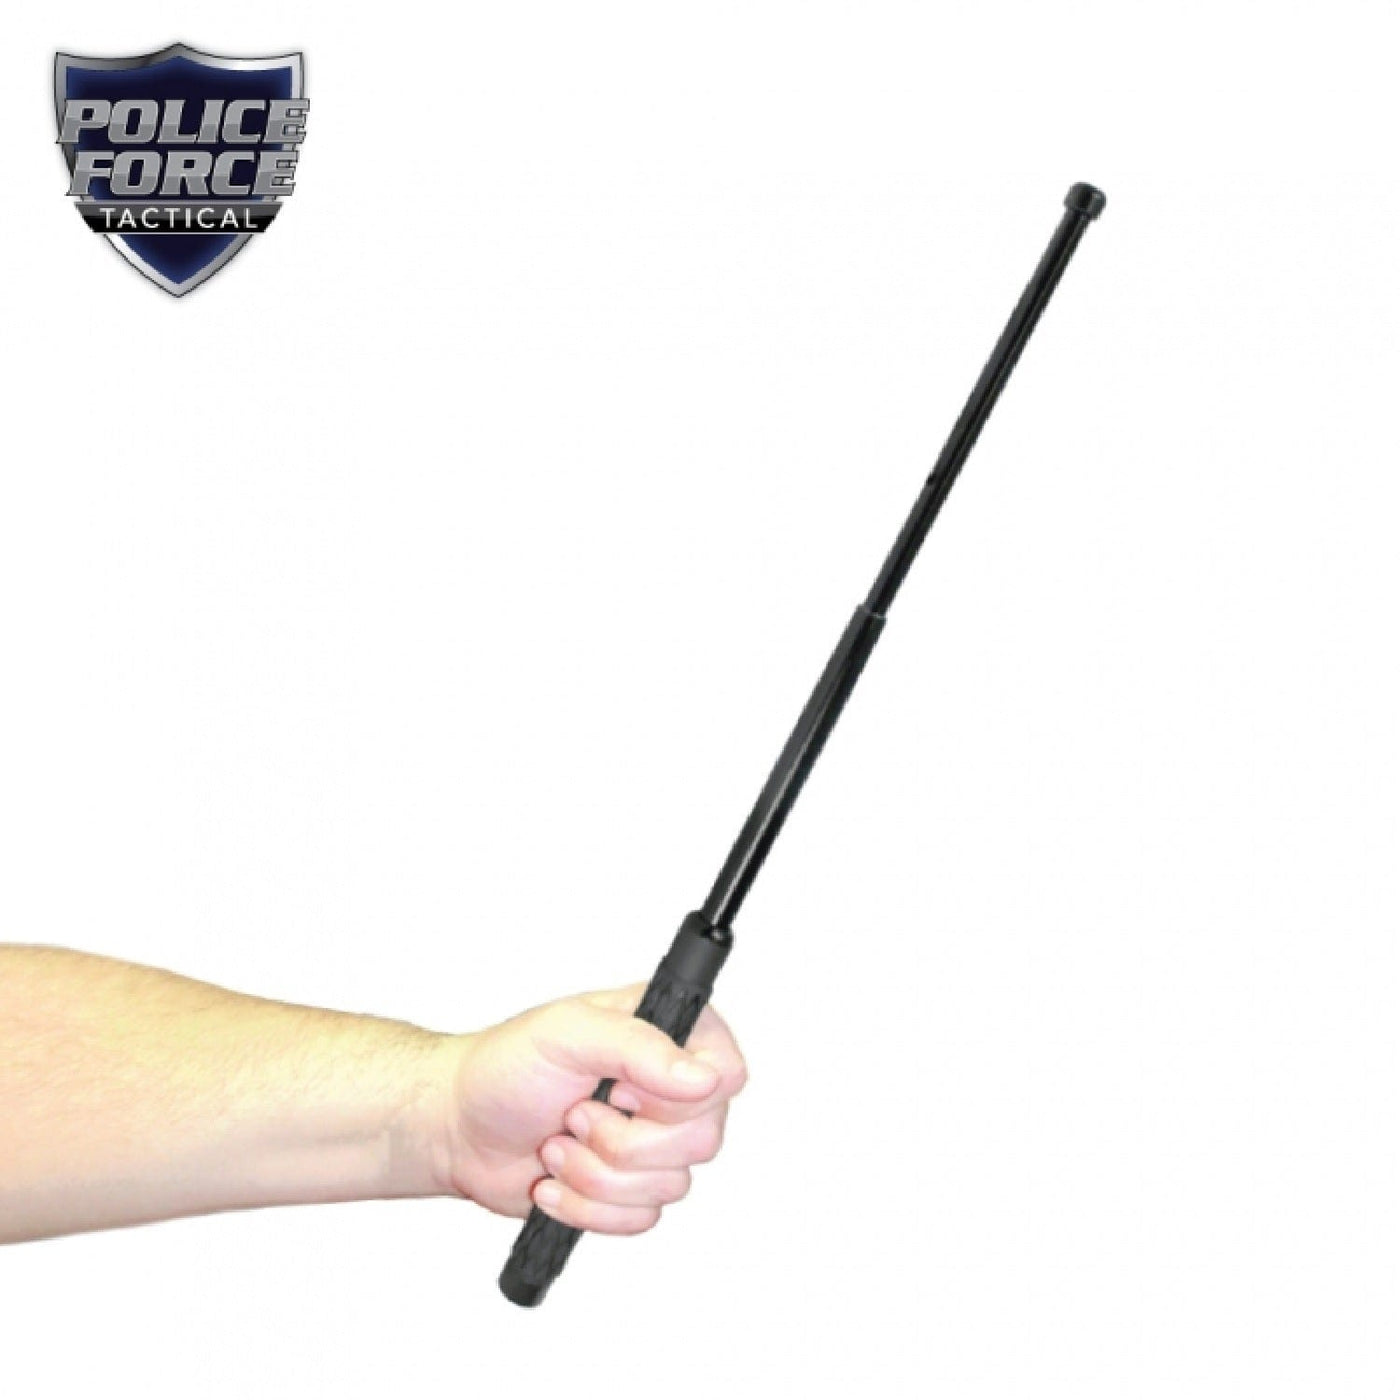 Police Force Police Force 21.0 in Expandable Metal Baton Public Safety And Le